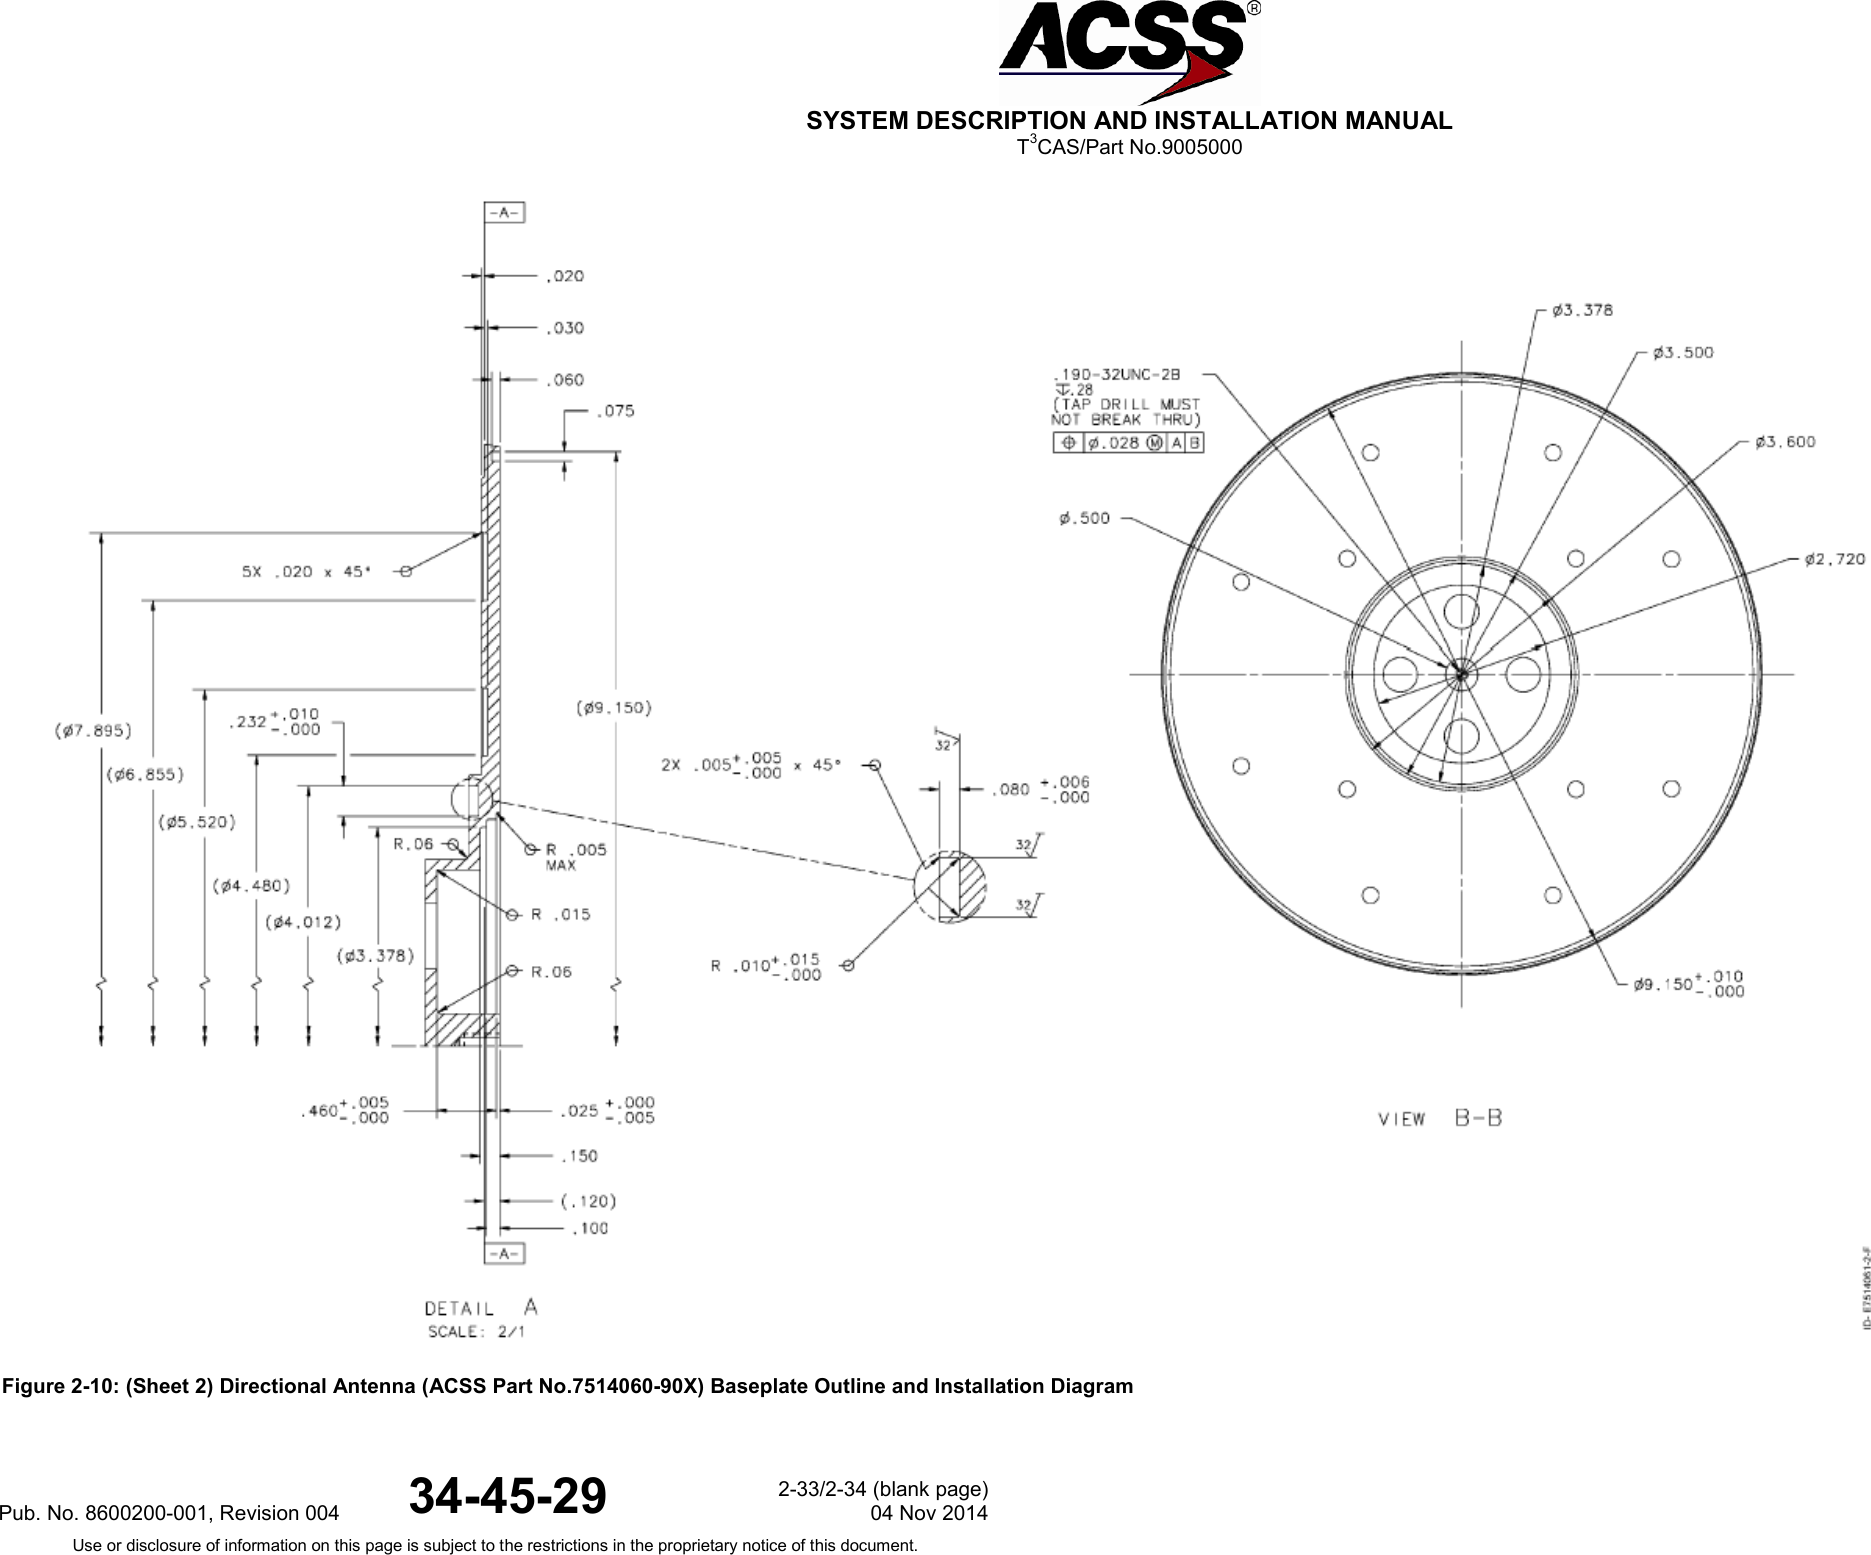  SYSTEM DESCRIPTION AND INSTALLATION MANUAL T3CAS/Part No.9005000  Figure 2-10: (Sheet 2) Directional Antenna (ACSS Part No.7514060-90X) Baseplate Outline and Installation DiagramPub. No. 8600200-001, Revision 004 34-45-29 2-33/2-34 (blank page) 04 Nov 2014 Use or disclosure of information on this page is subject to the restrictions in the proprietary notice of this document.  